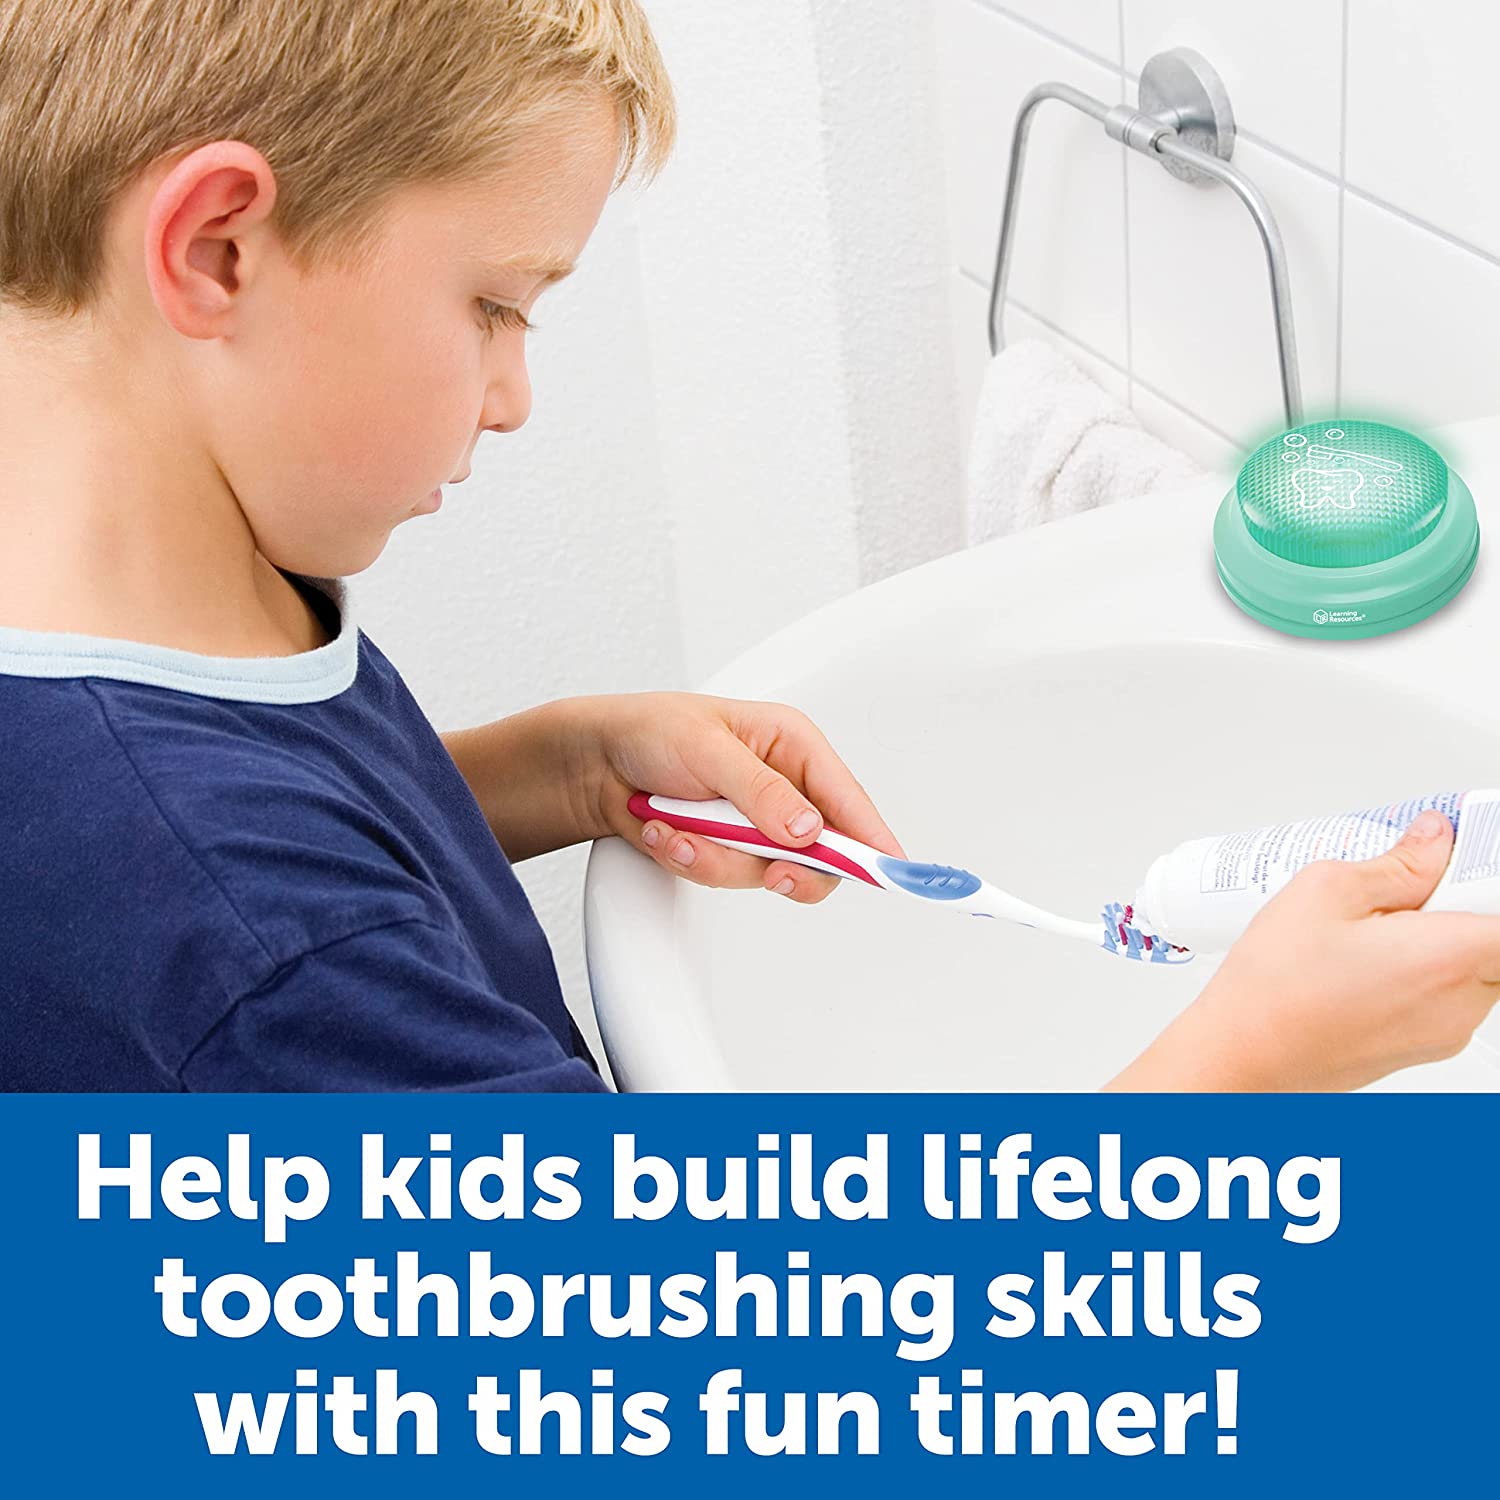 A child with light skin tone and short blonde hair puts toothpaste on a toothbrush over a bathroom sink. There is a Toothbrush Timer on the sink ledge.